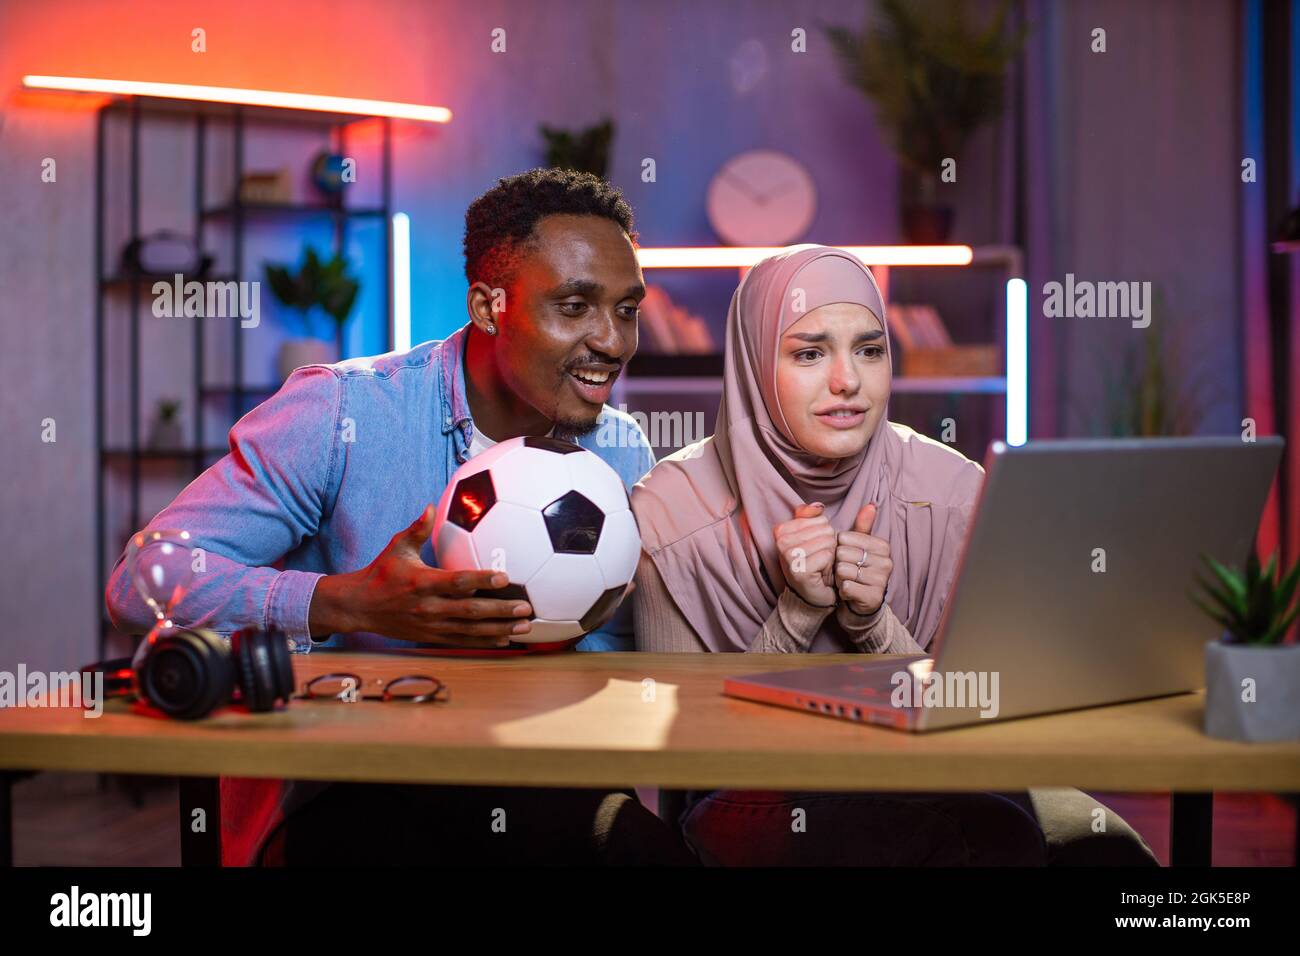 Worried african man and muslim woman watching soccer game on wireless laptop at home. Young multiracial couple enjoying time spending together. Emotions and excitement concept. Stock Photo